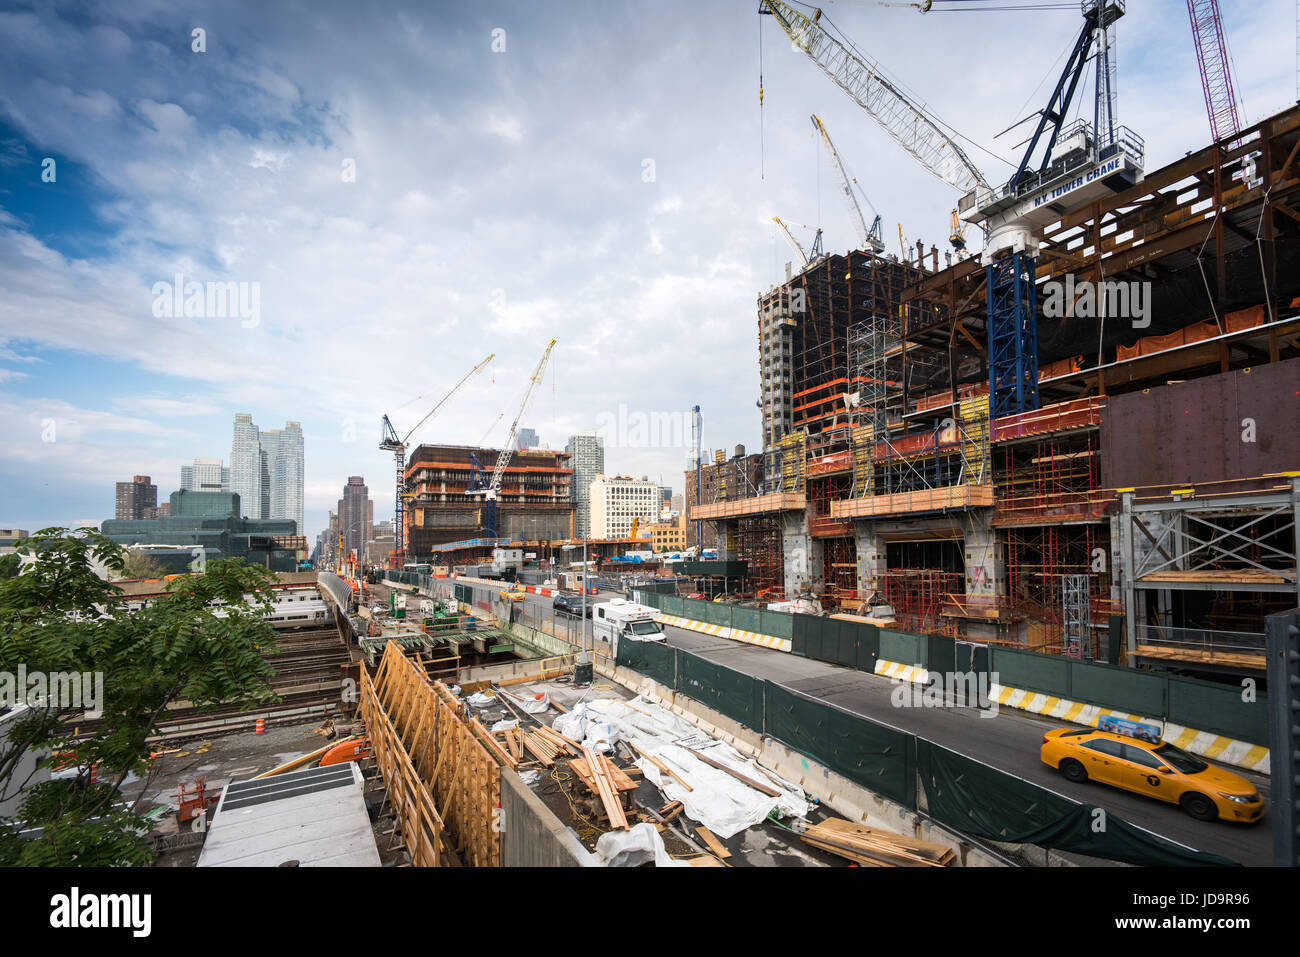 Construction site with incomplete buildings and cranes, New York, USA. 2016 urban city United States of America Stock Photo